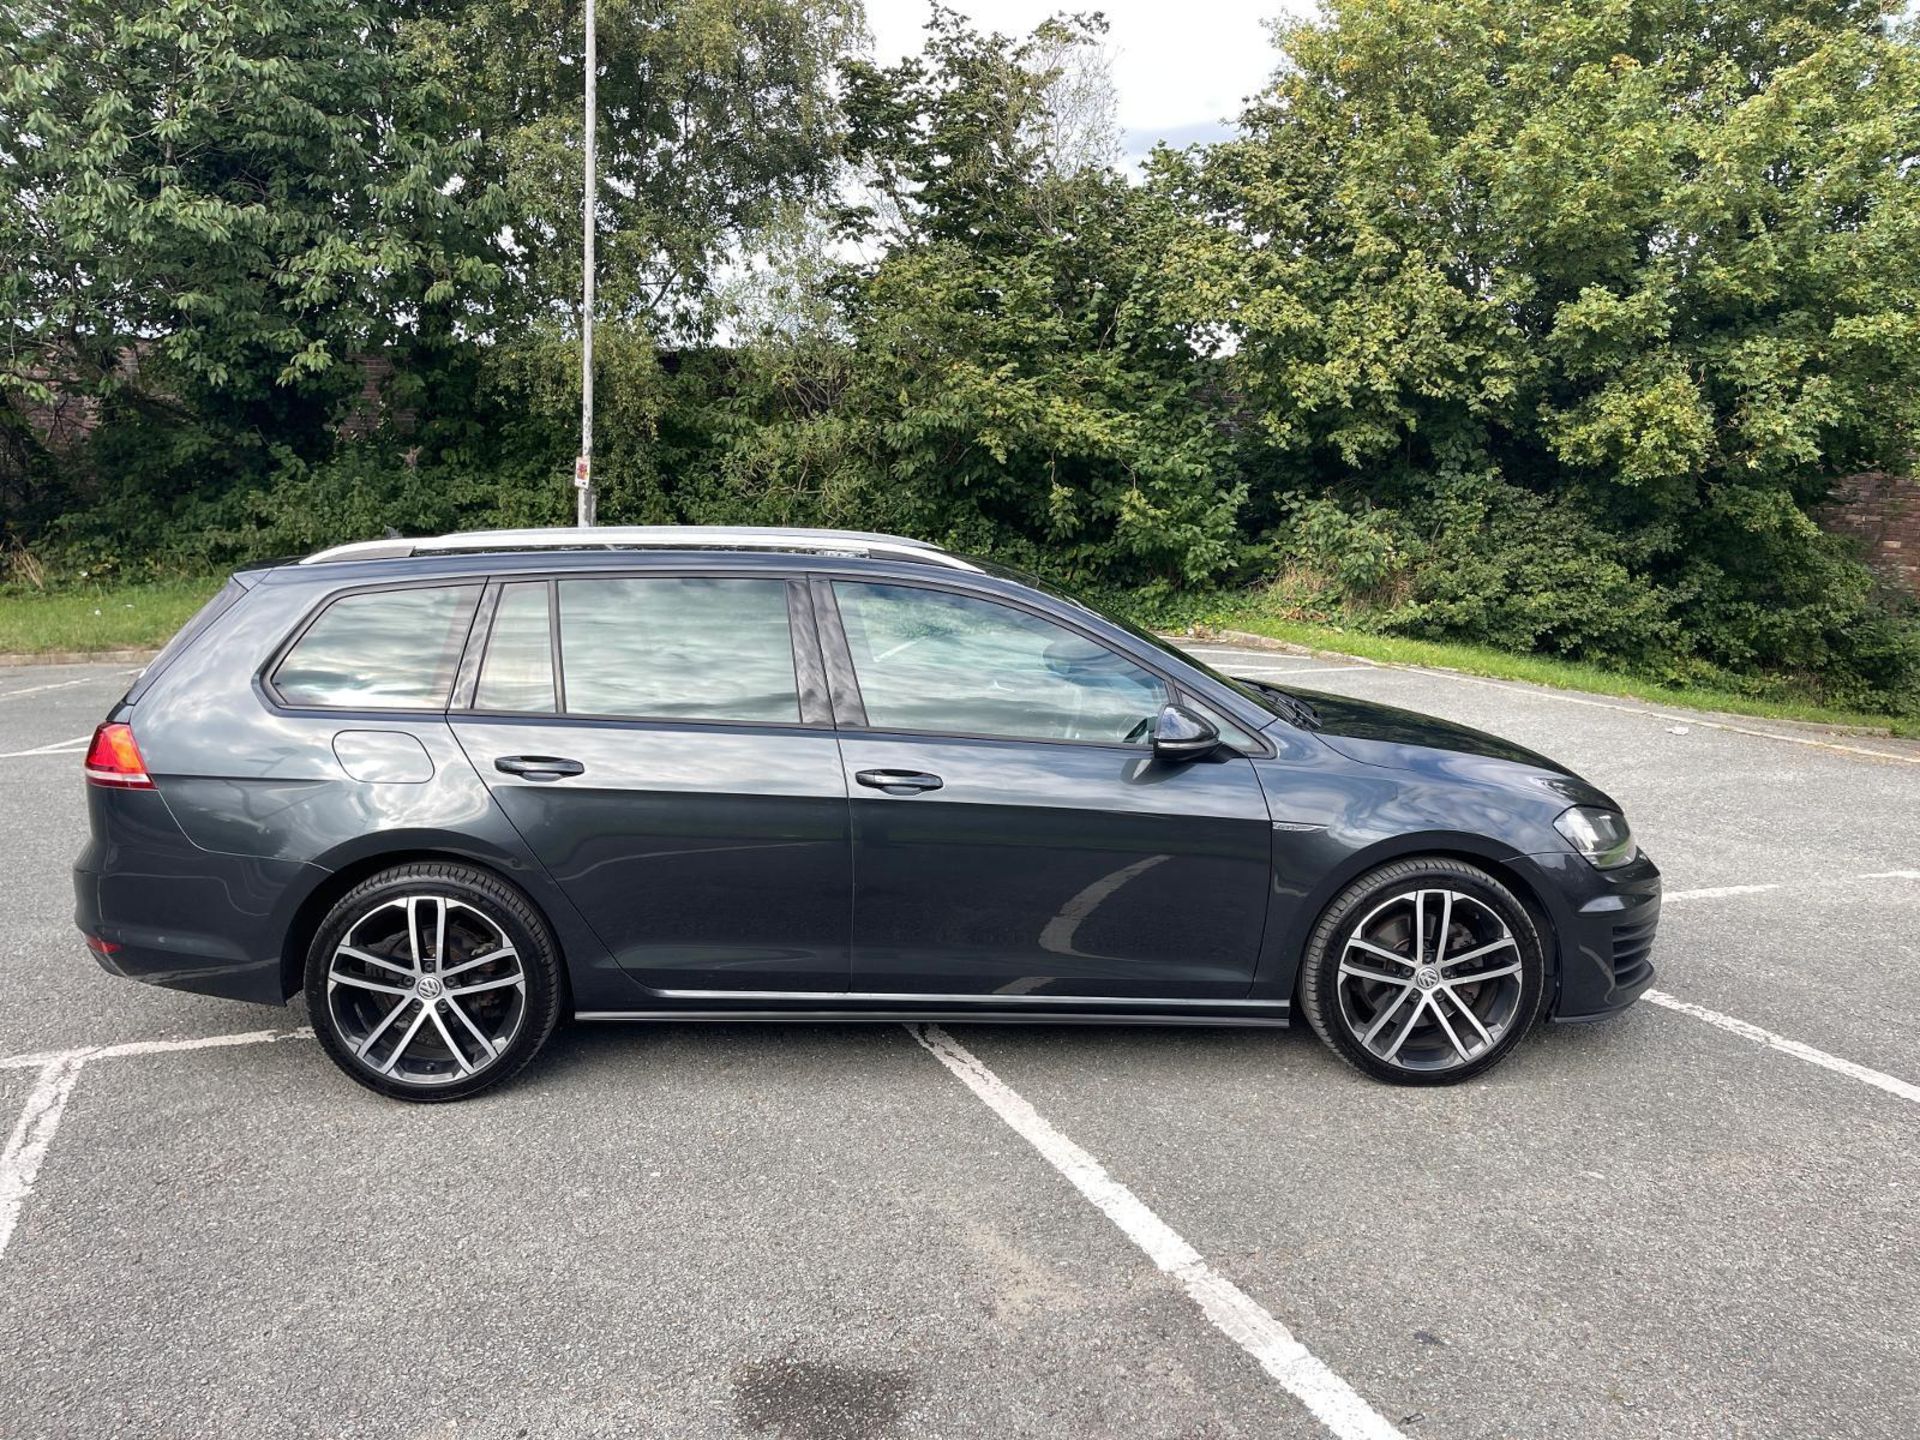 66 PLATE GOLF GTD : USUAL REFINEMENTS AND MORE - 12 MONTH MOT (NO VAT ON HAMMER) - Image 11 of 12